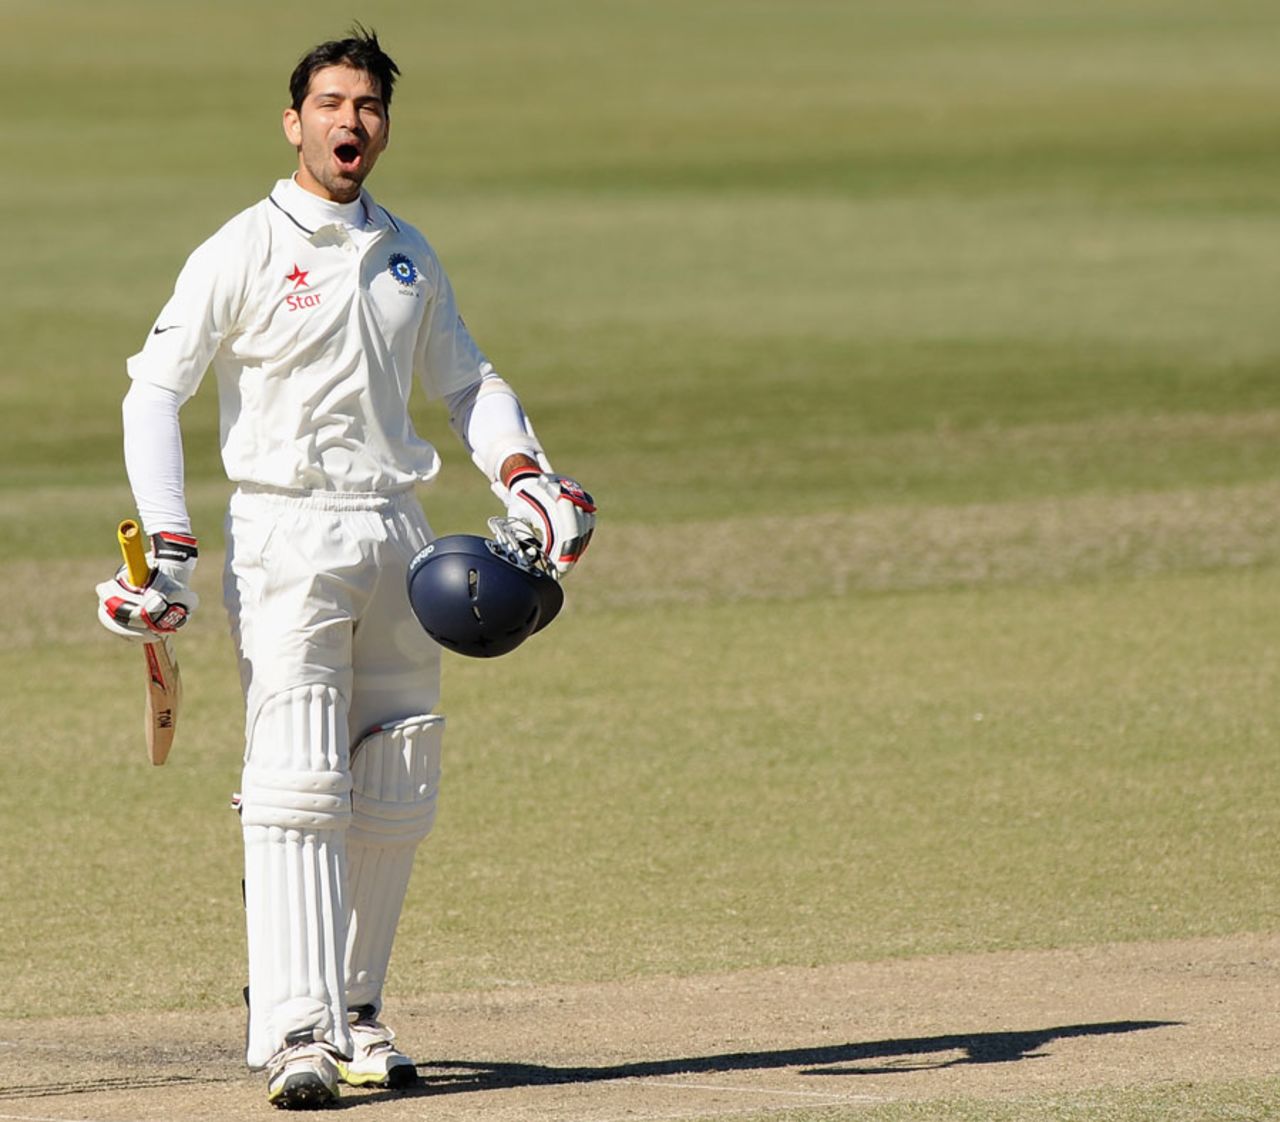 Naman Ojha exults after reaching his double hundred, Australia A v India A, 1st unofficial Test, Brisbane, 2nd day, July 7, 2014